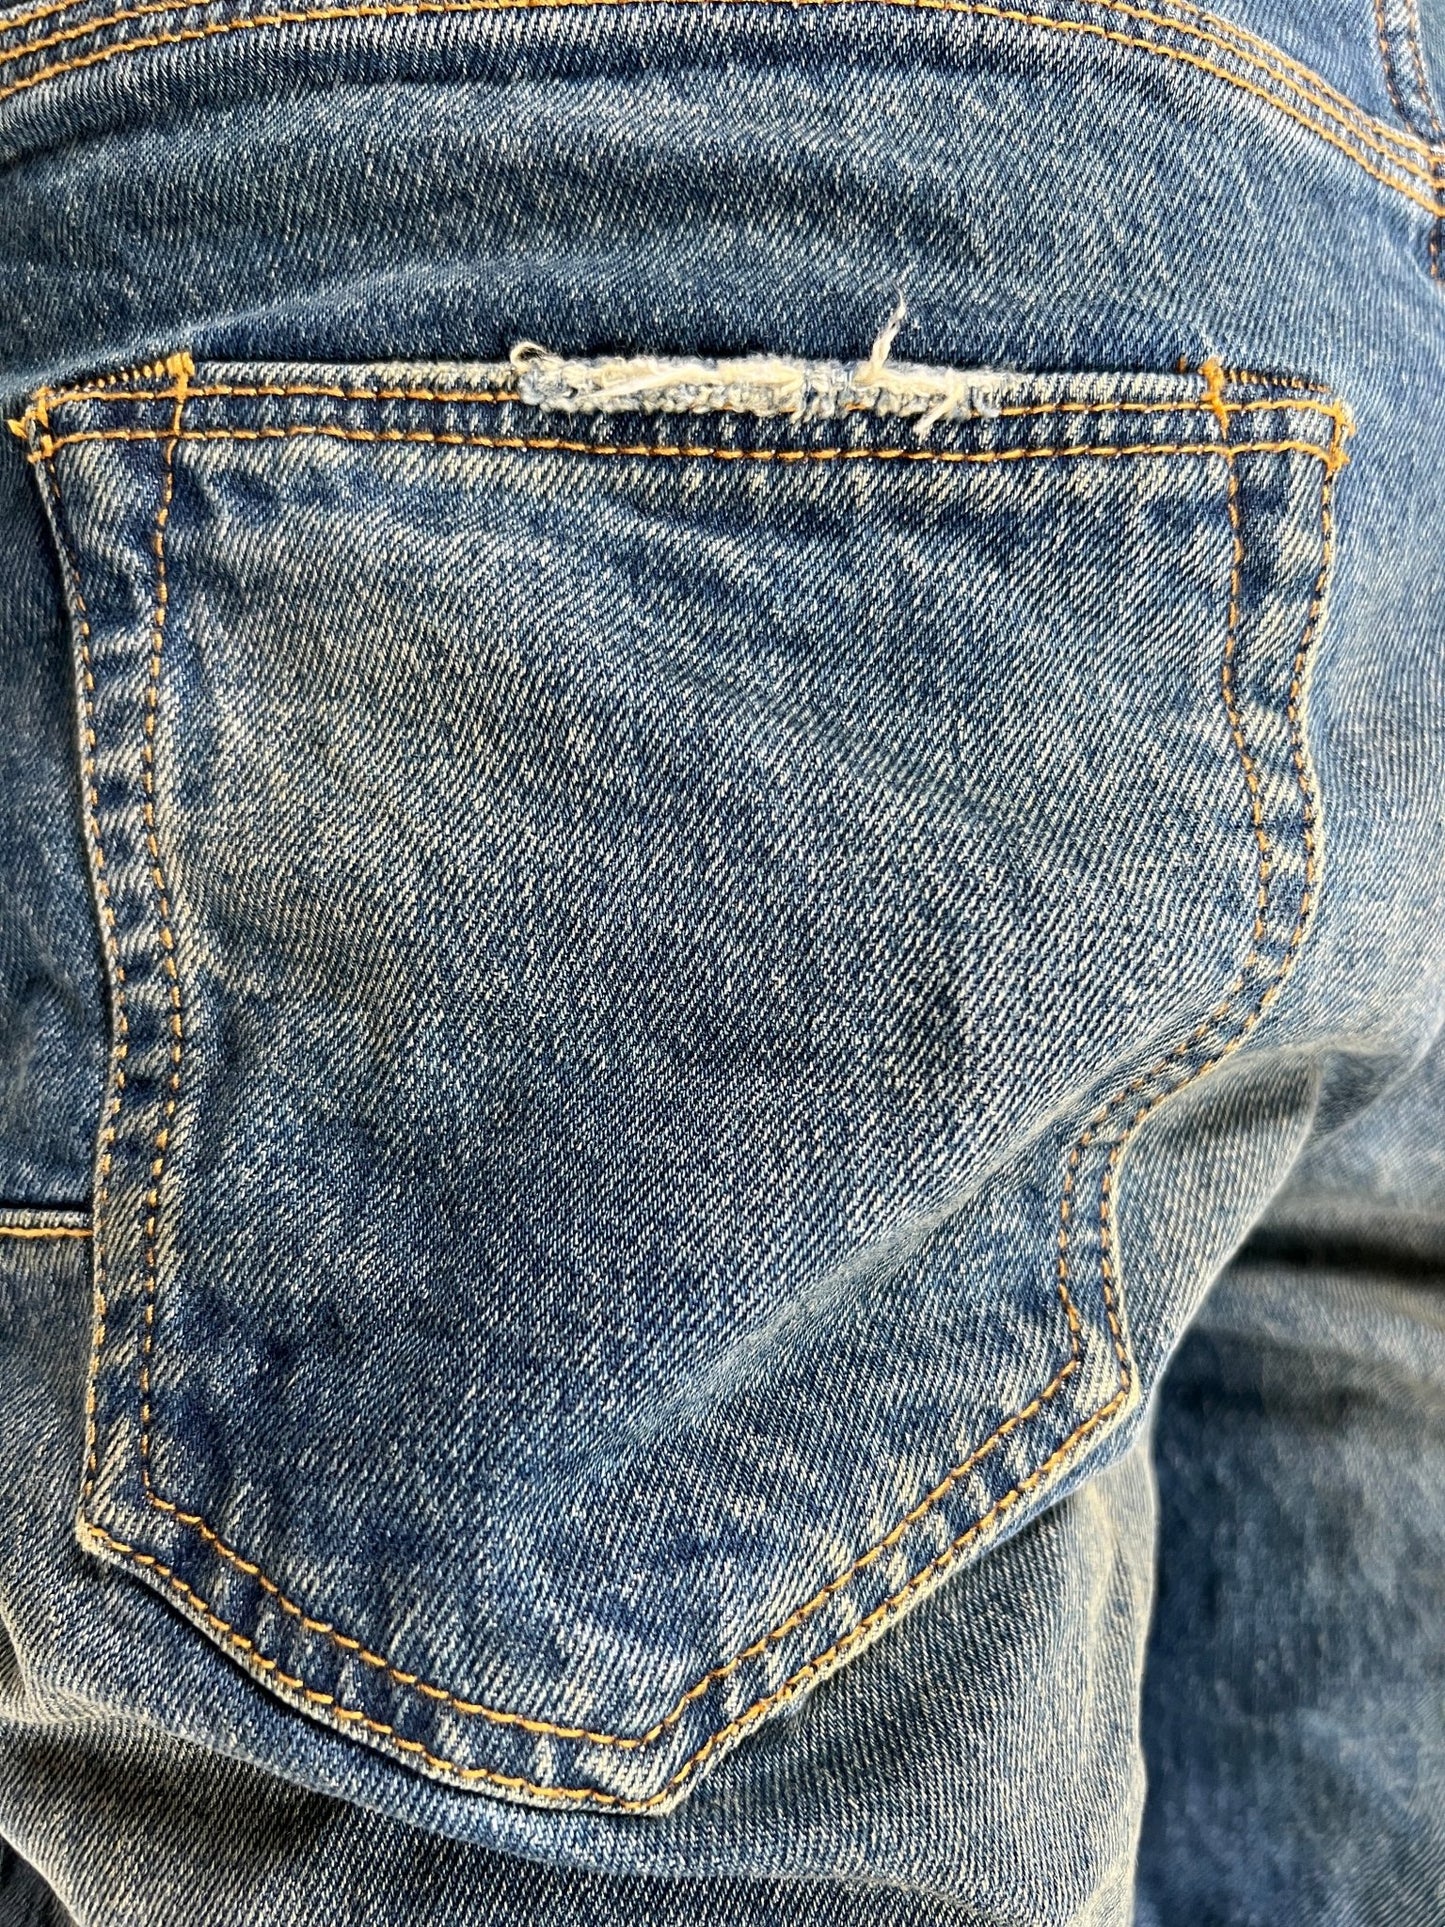 A pair of PURPLE BRAND P001-DPMI DIRTY PATINA DK INDIGO jeans with a hole in the pocket.